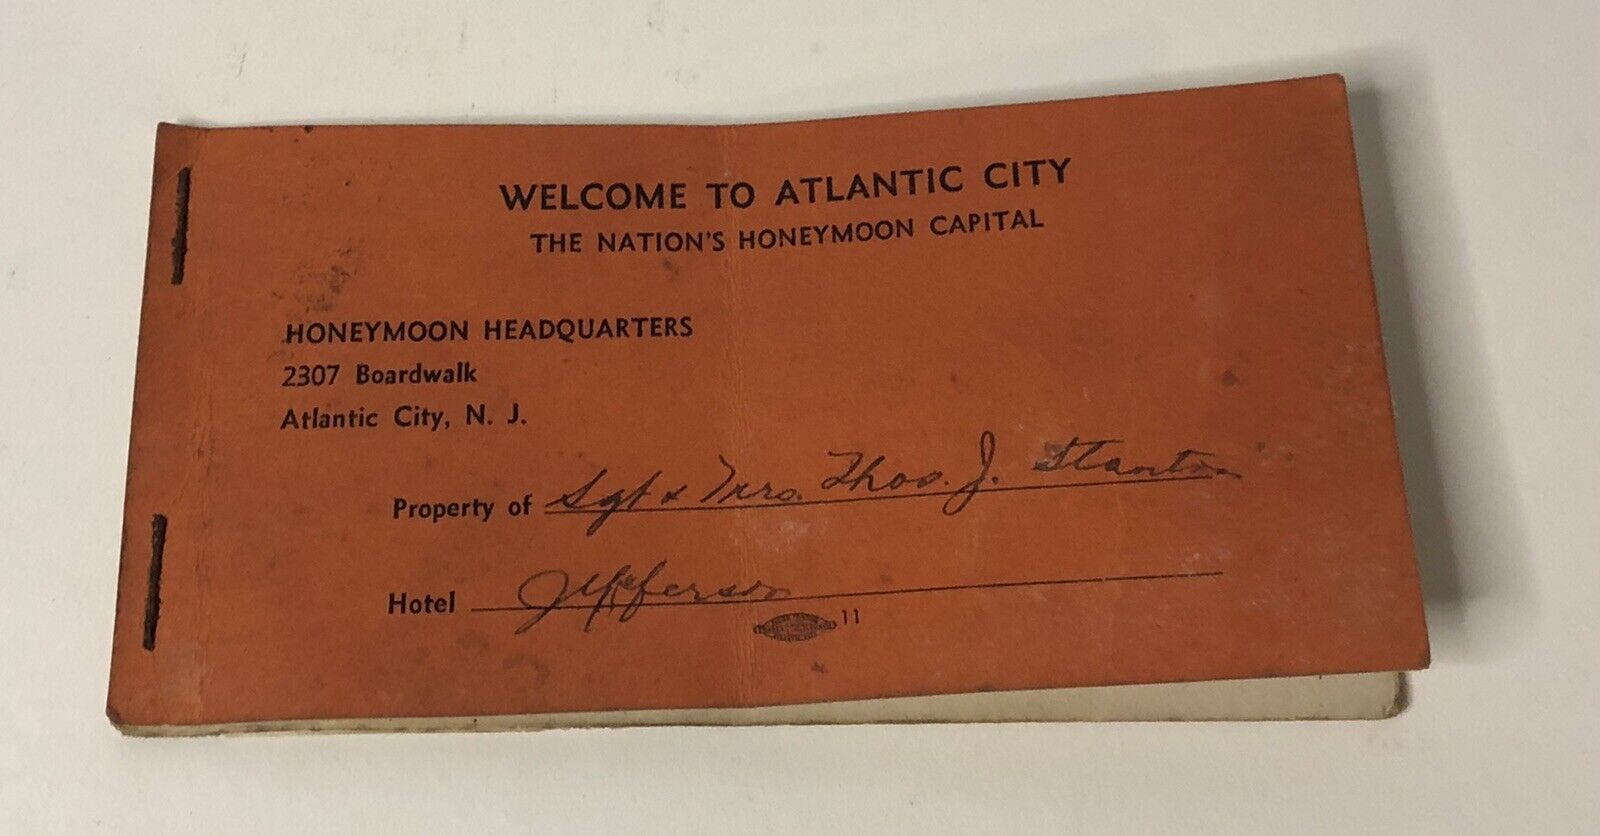 VINTAGE 1945 WELCOME TO ATLANTIC CITY HONEYMOON COUPON BOOK FOR NEWLYWEDS